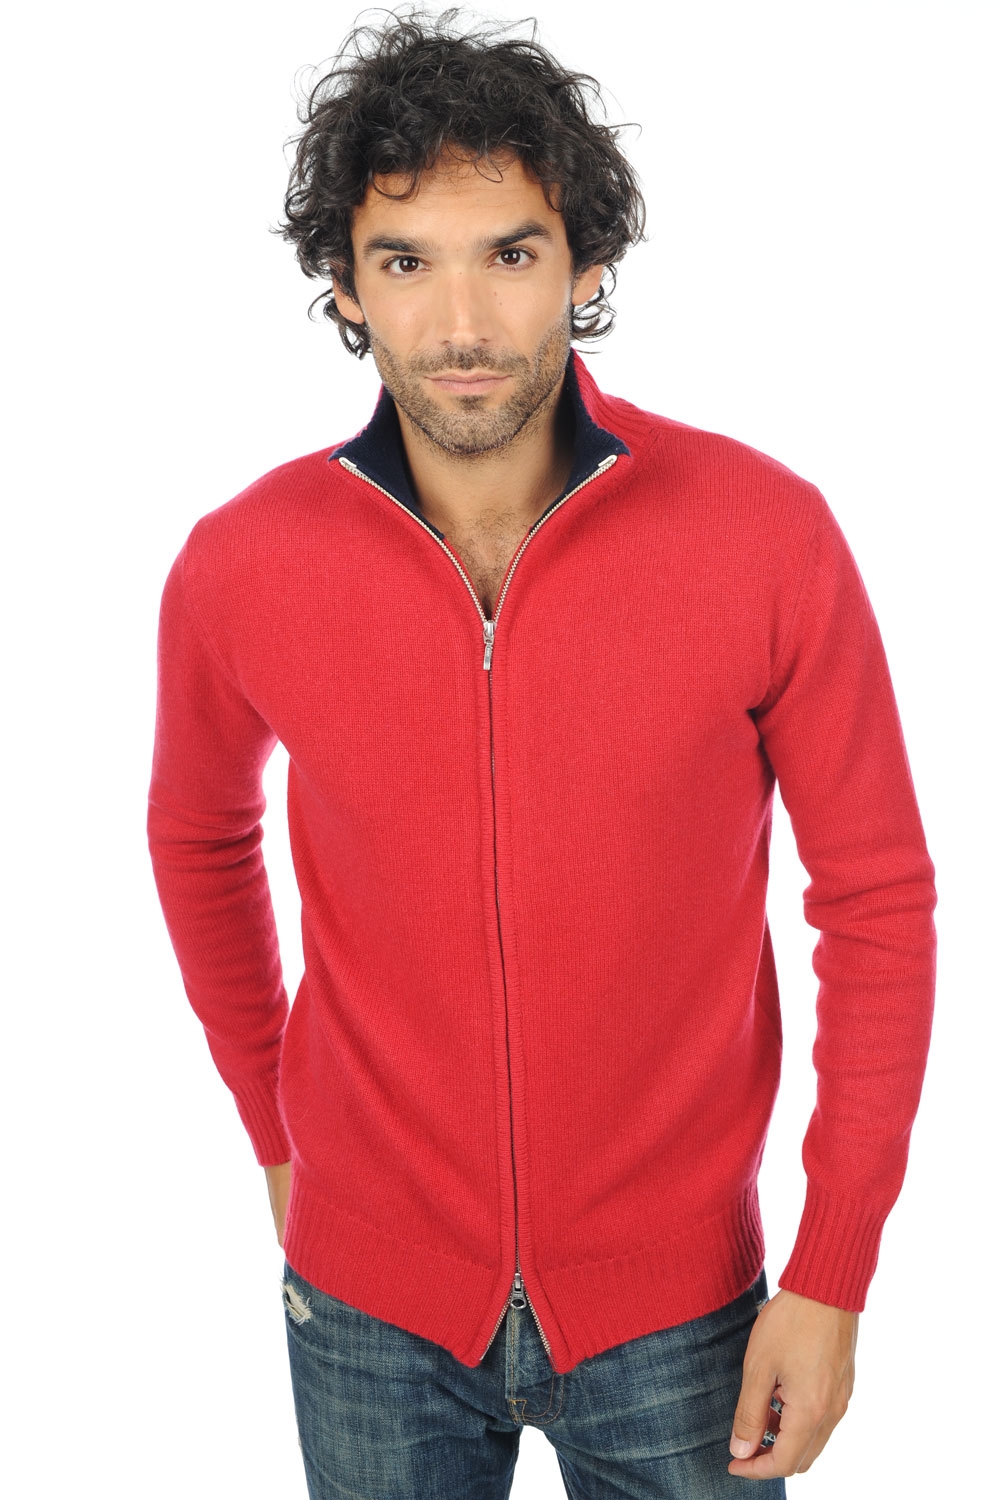 Cachemire pull homme maxime rouge velours marine fonce 3xl